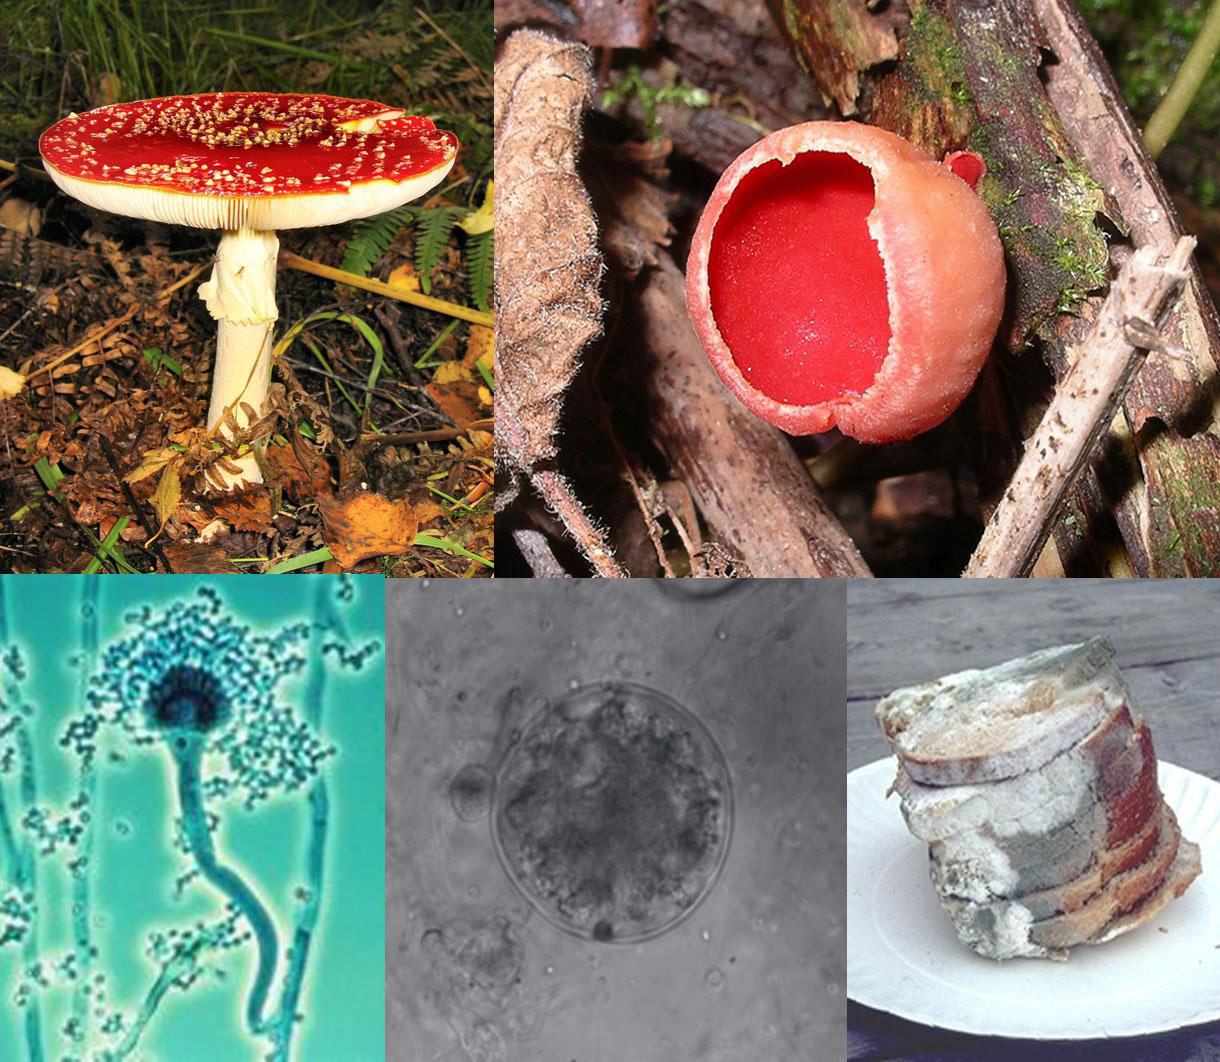 A collage of five fungi (clockwise from top-left): a mushroom with a flat, red top with white-spots, and a white stem growing on the ground; a red cup-shaped fungus growing on wood; a stack of green and white moldy bread slices on a plate; a microscopic, spherical grey semitransparent cell, with a smaller spherical cell beside it; a microscopic view of an elongated cellular structure shaped like a microphone, attached to the larger end is a number of smaller roughly circular elements that collectively form a mass around sites.